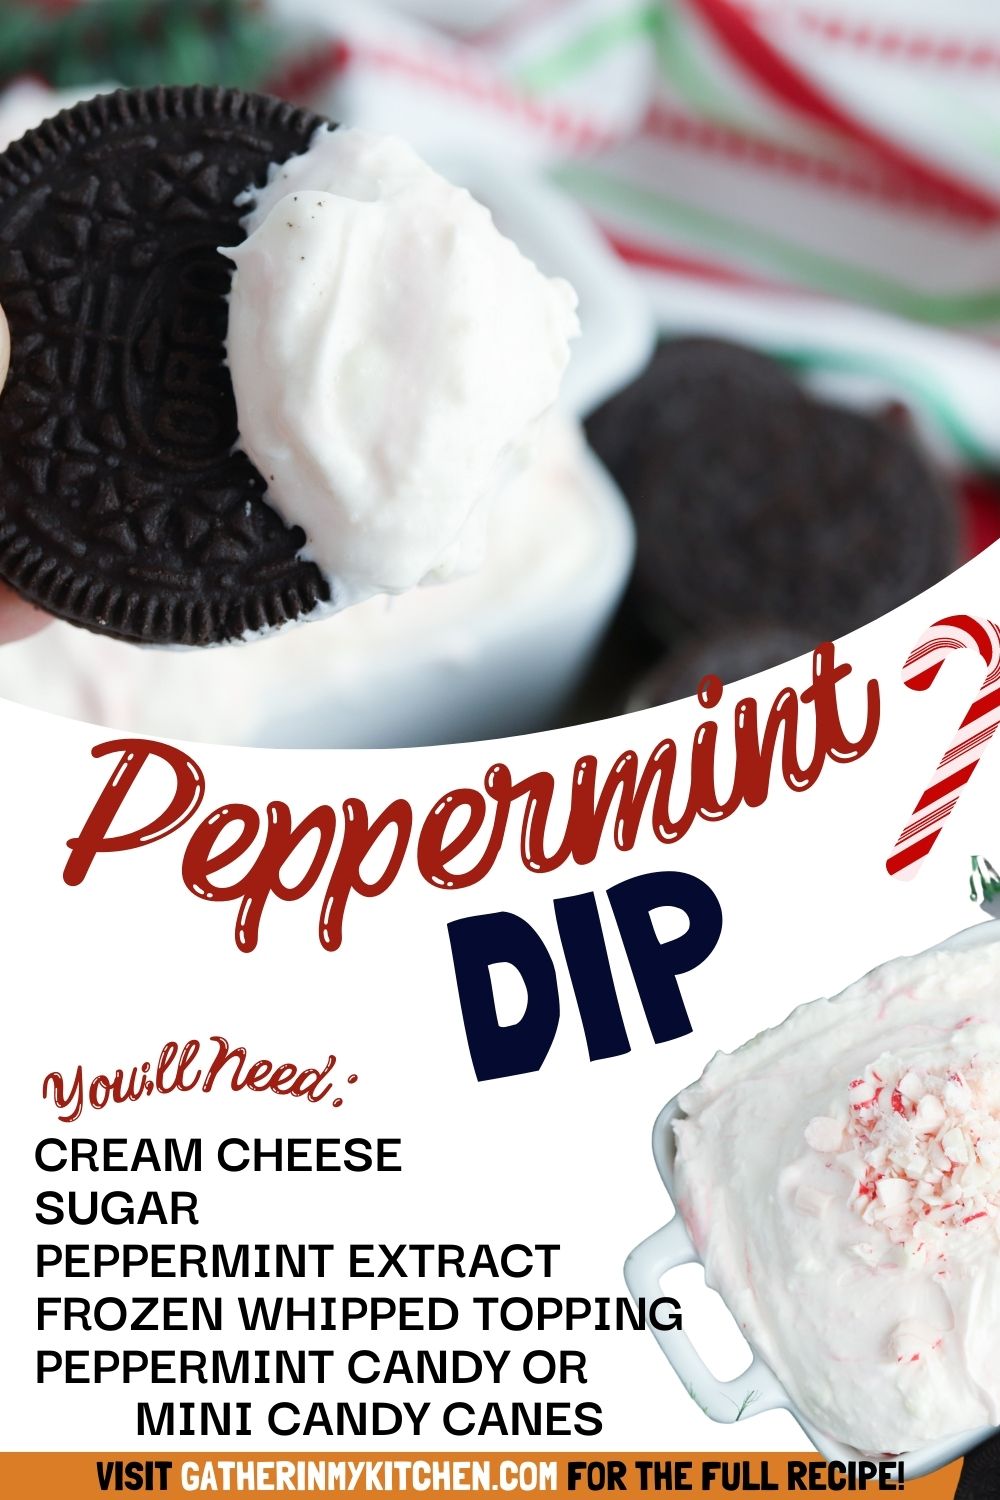 Top has Oreo cookie with peppermint dip on it and bottom has the words "Peppermint Dip" with the ingredients listed.